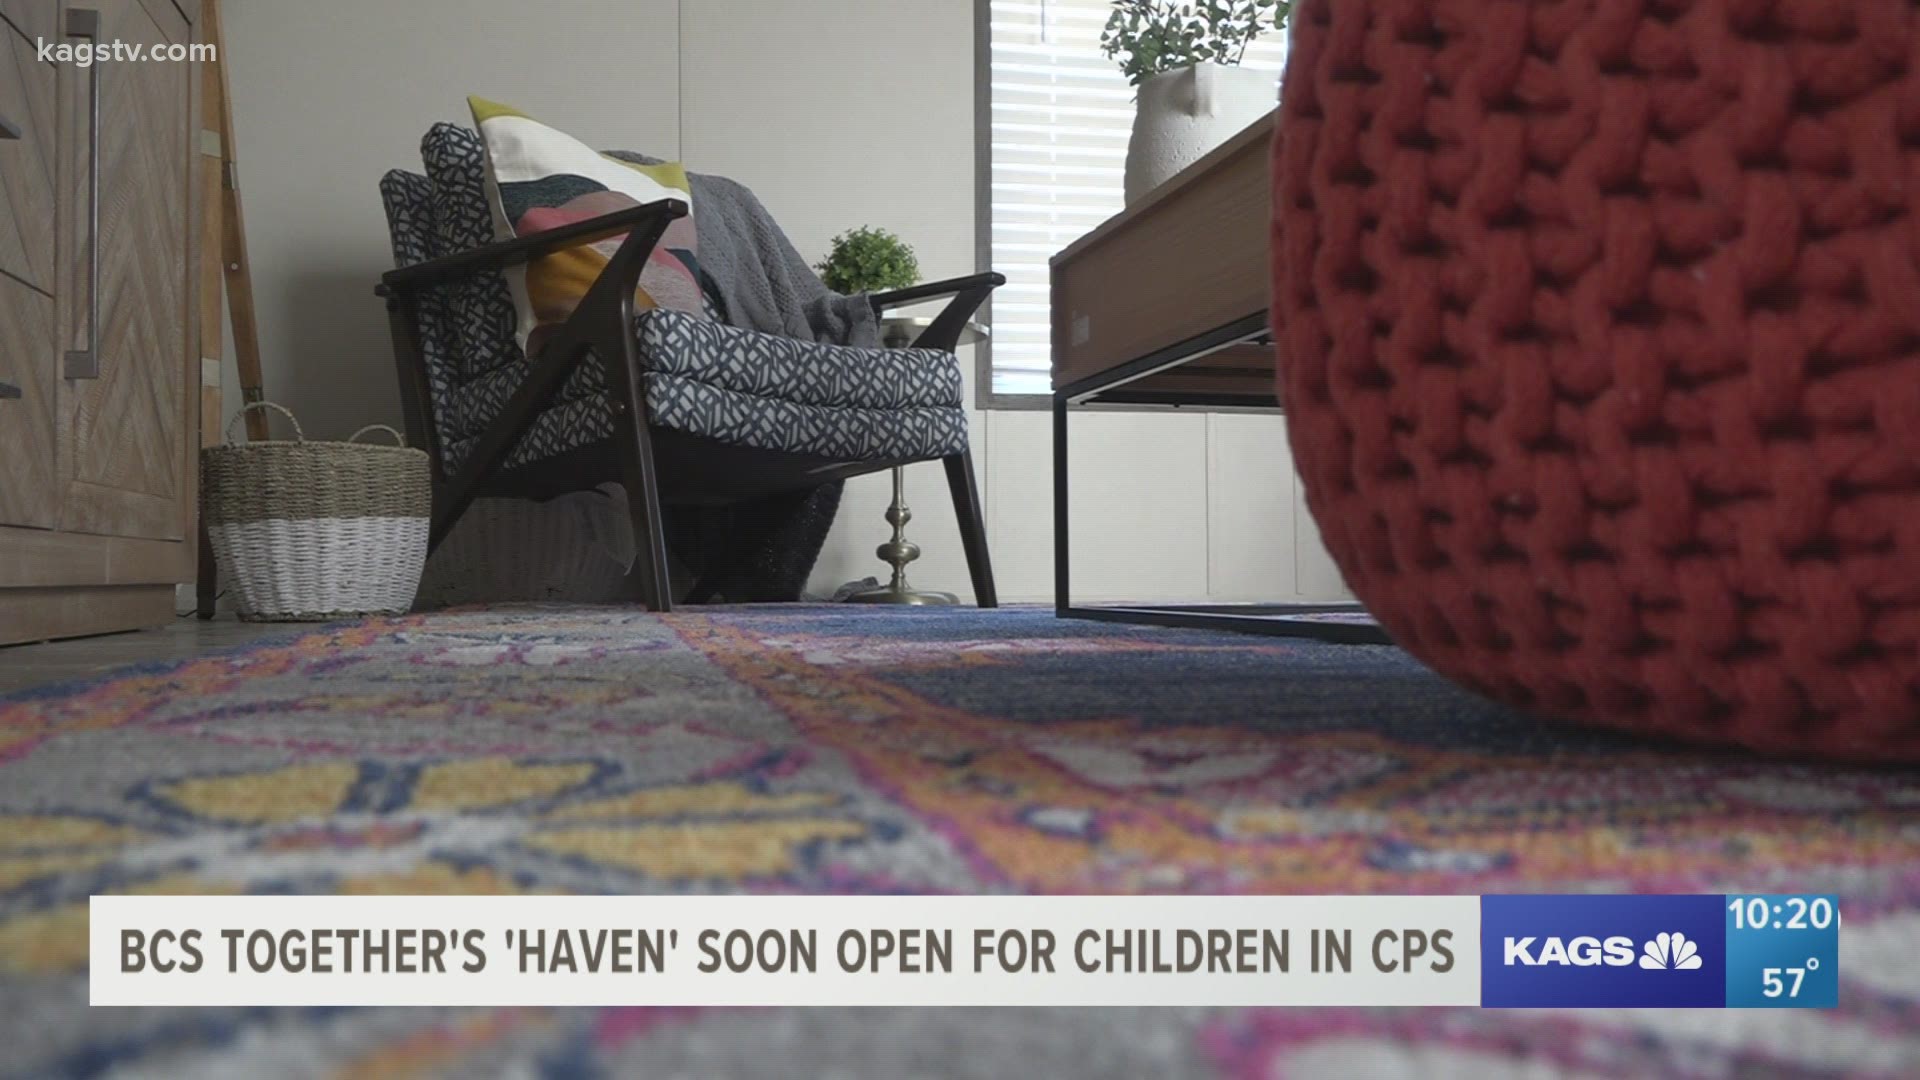 BCS Together will open the Haven next week. It is a place for children in child protective services to stay as they wait for a family to house them long term.